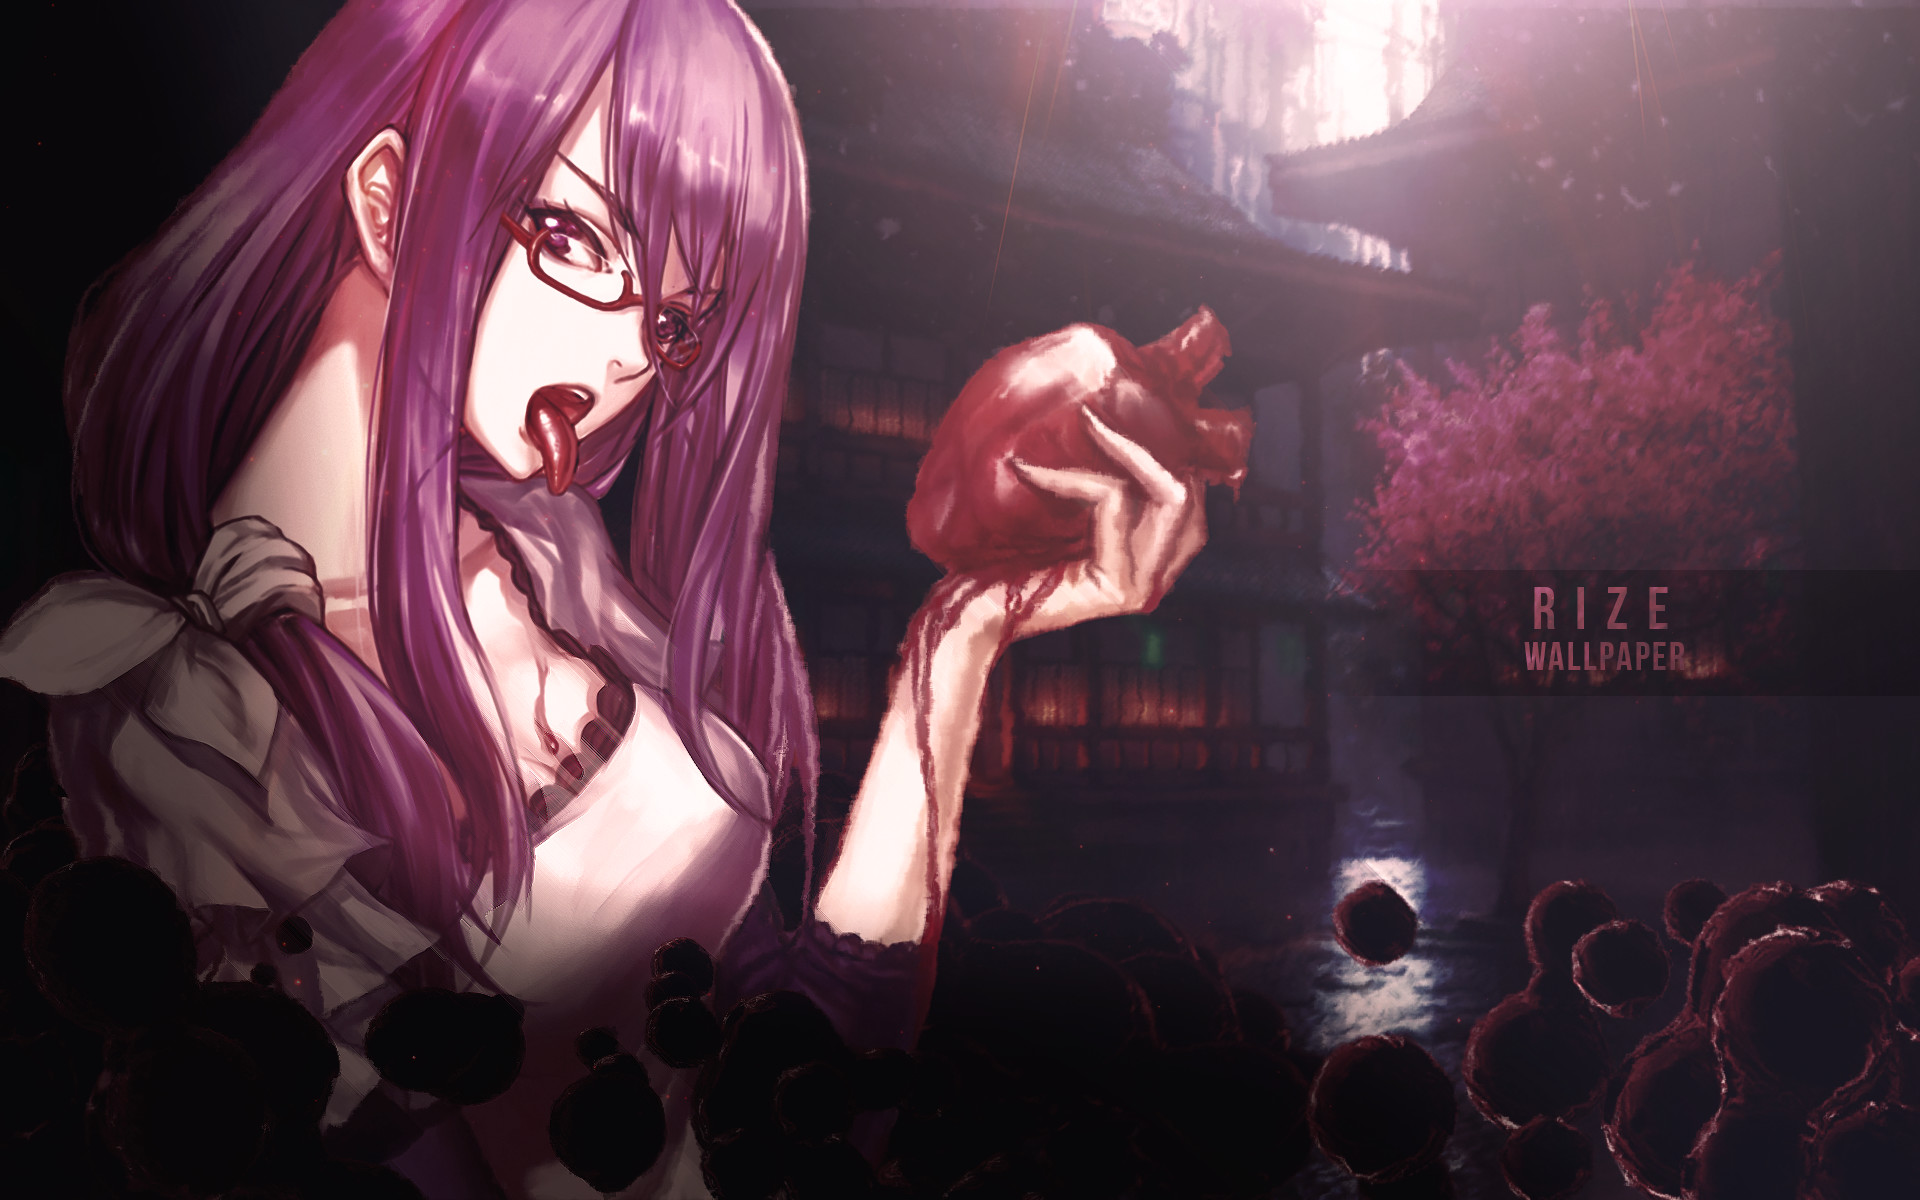 Tokyo Ghoul Rize Wallpaper Image